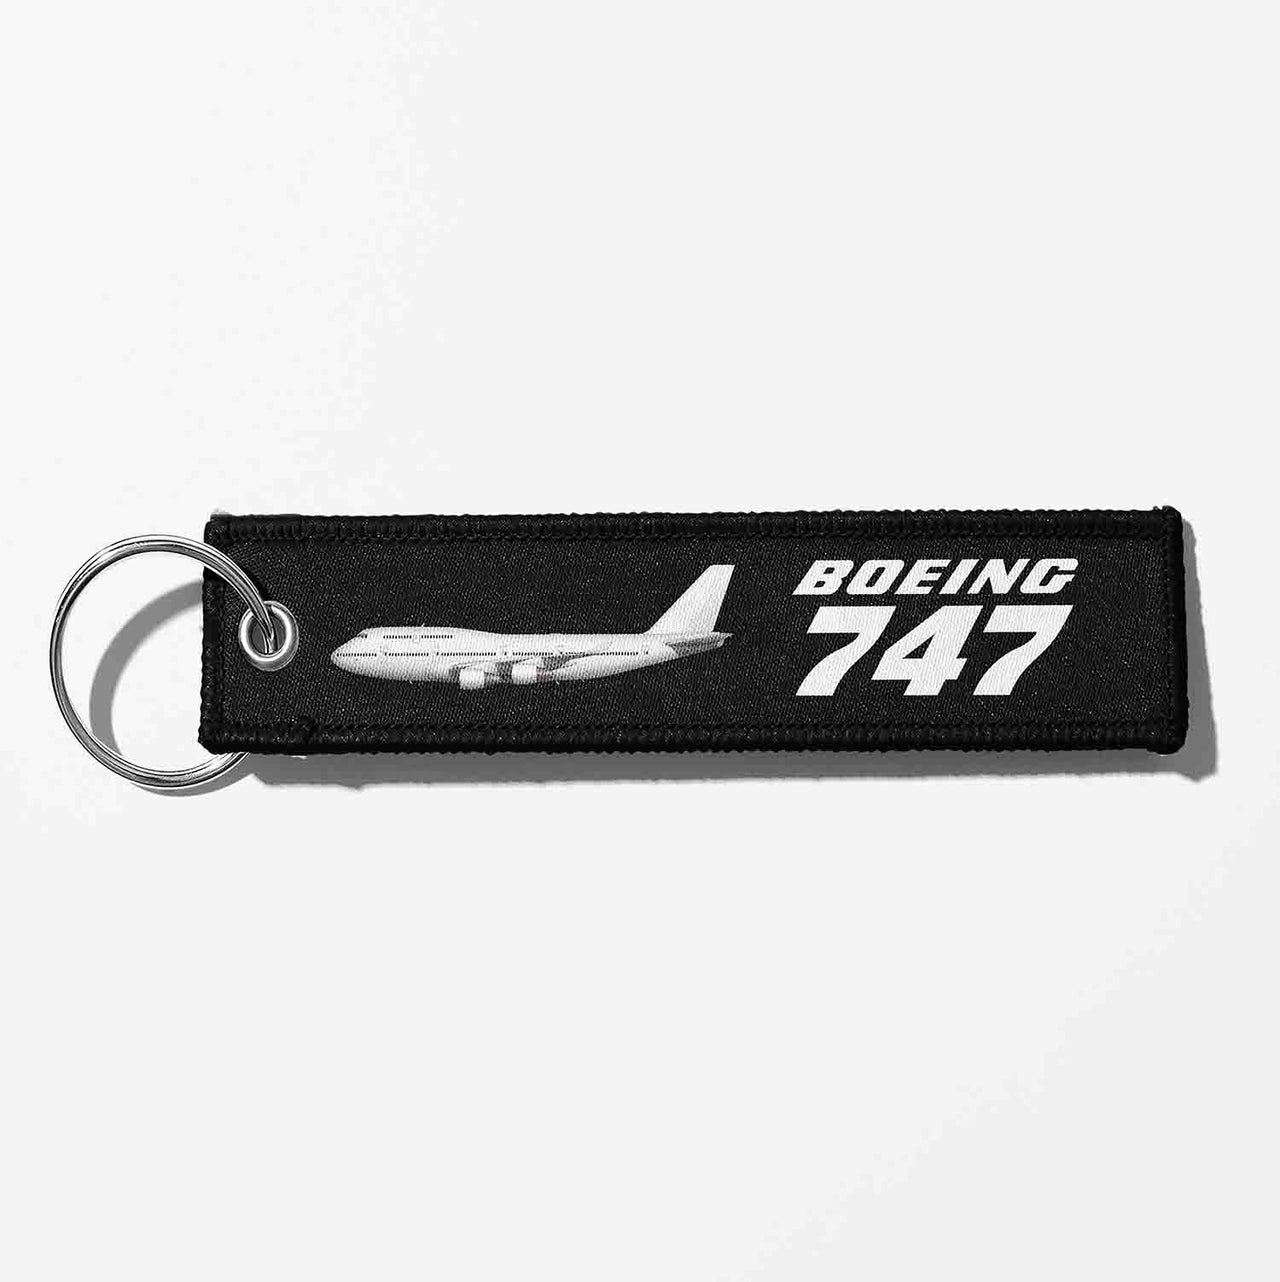 The Boeing 747 Designed Key Chains